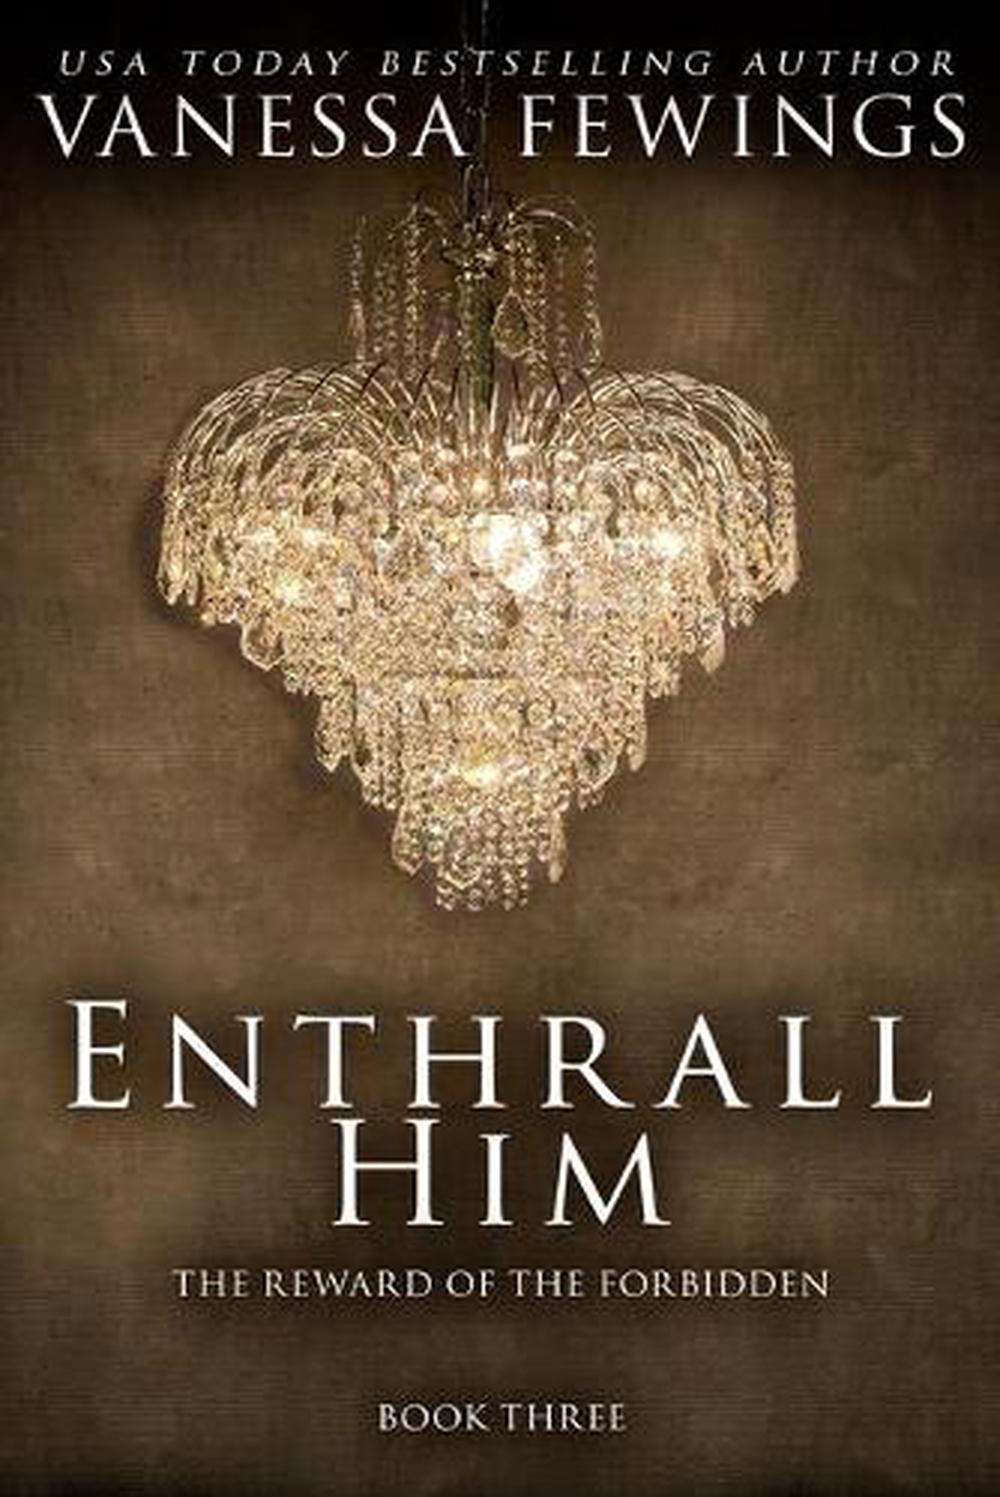 Enthrall by Vanessa Fewings